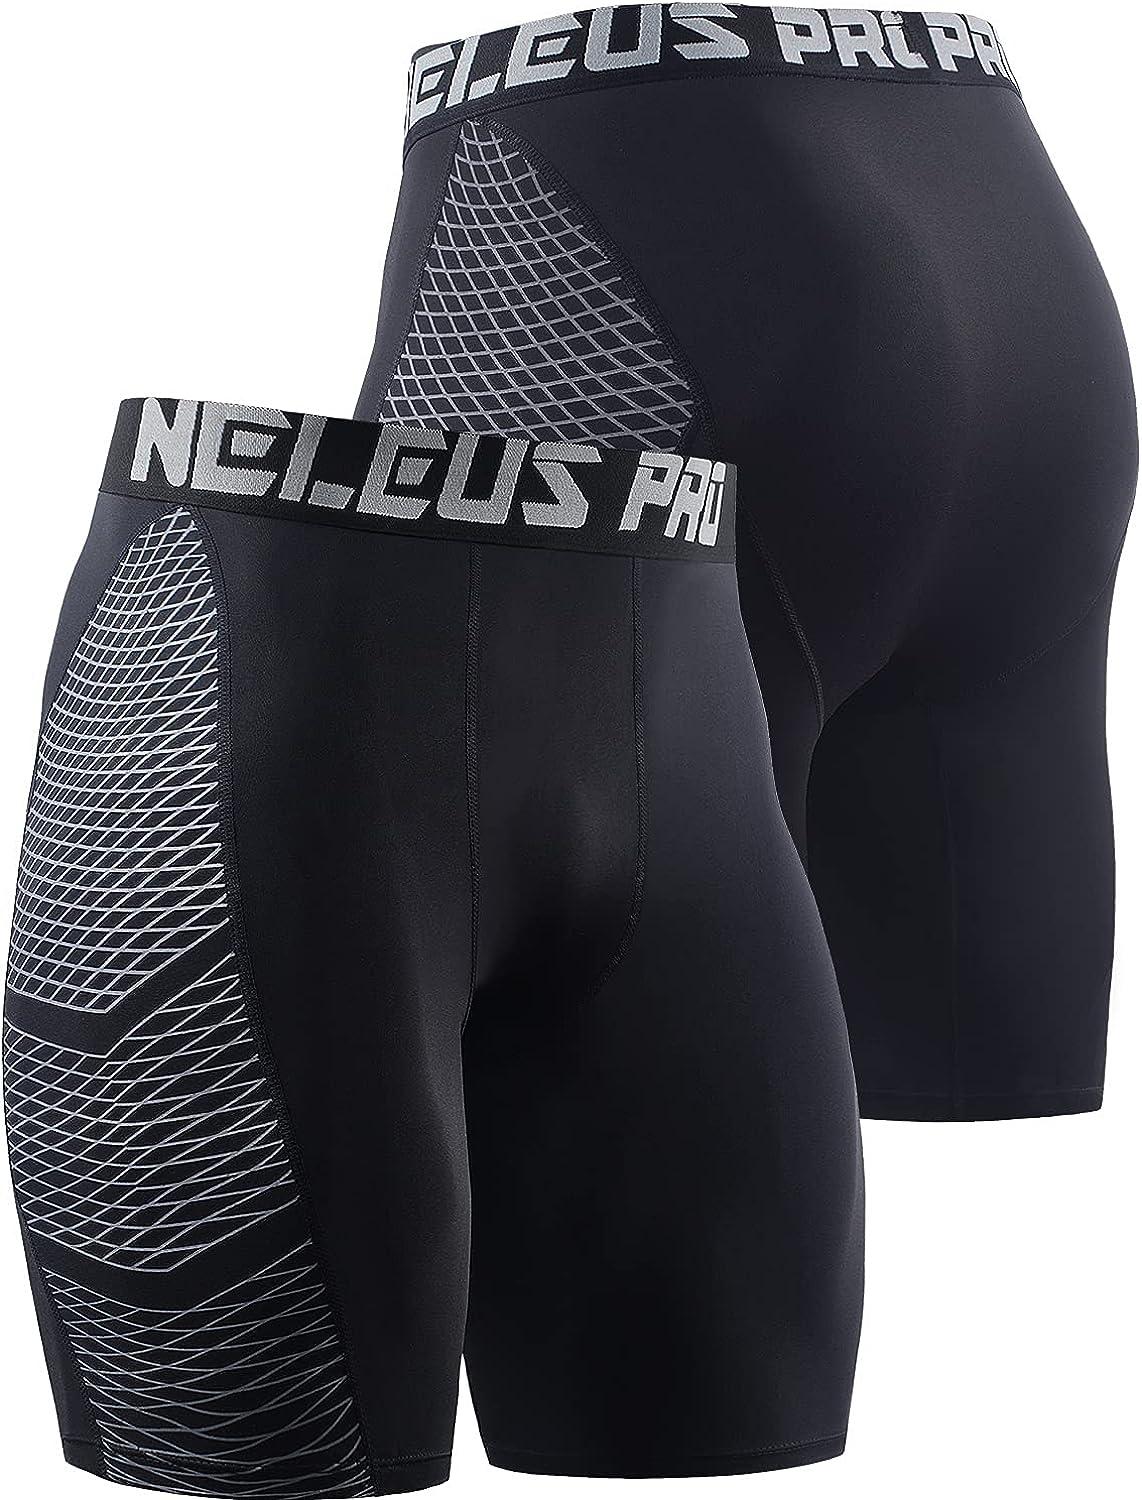 NELEUS Men's Compression Shorts Pack of 3 Small 6086# Black/Grey/White,3  Pack